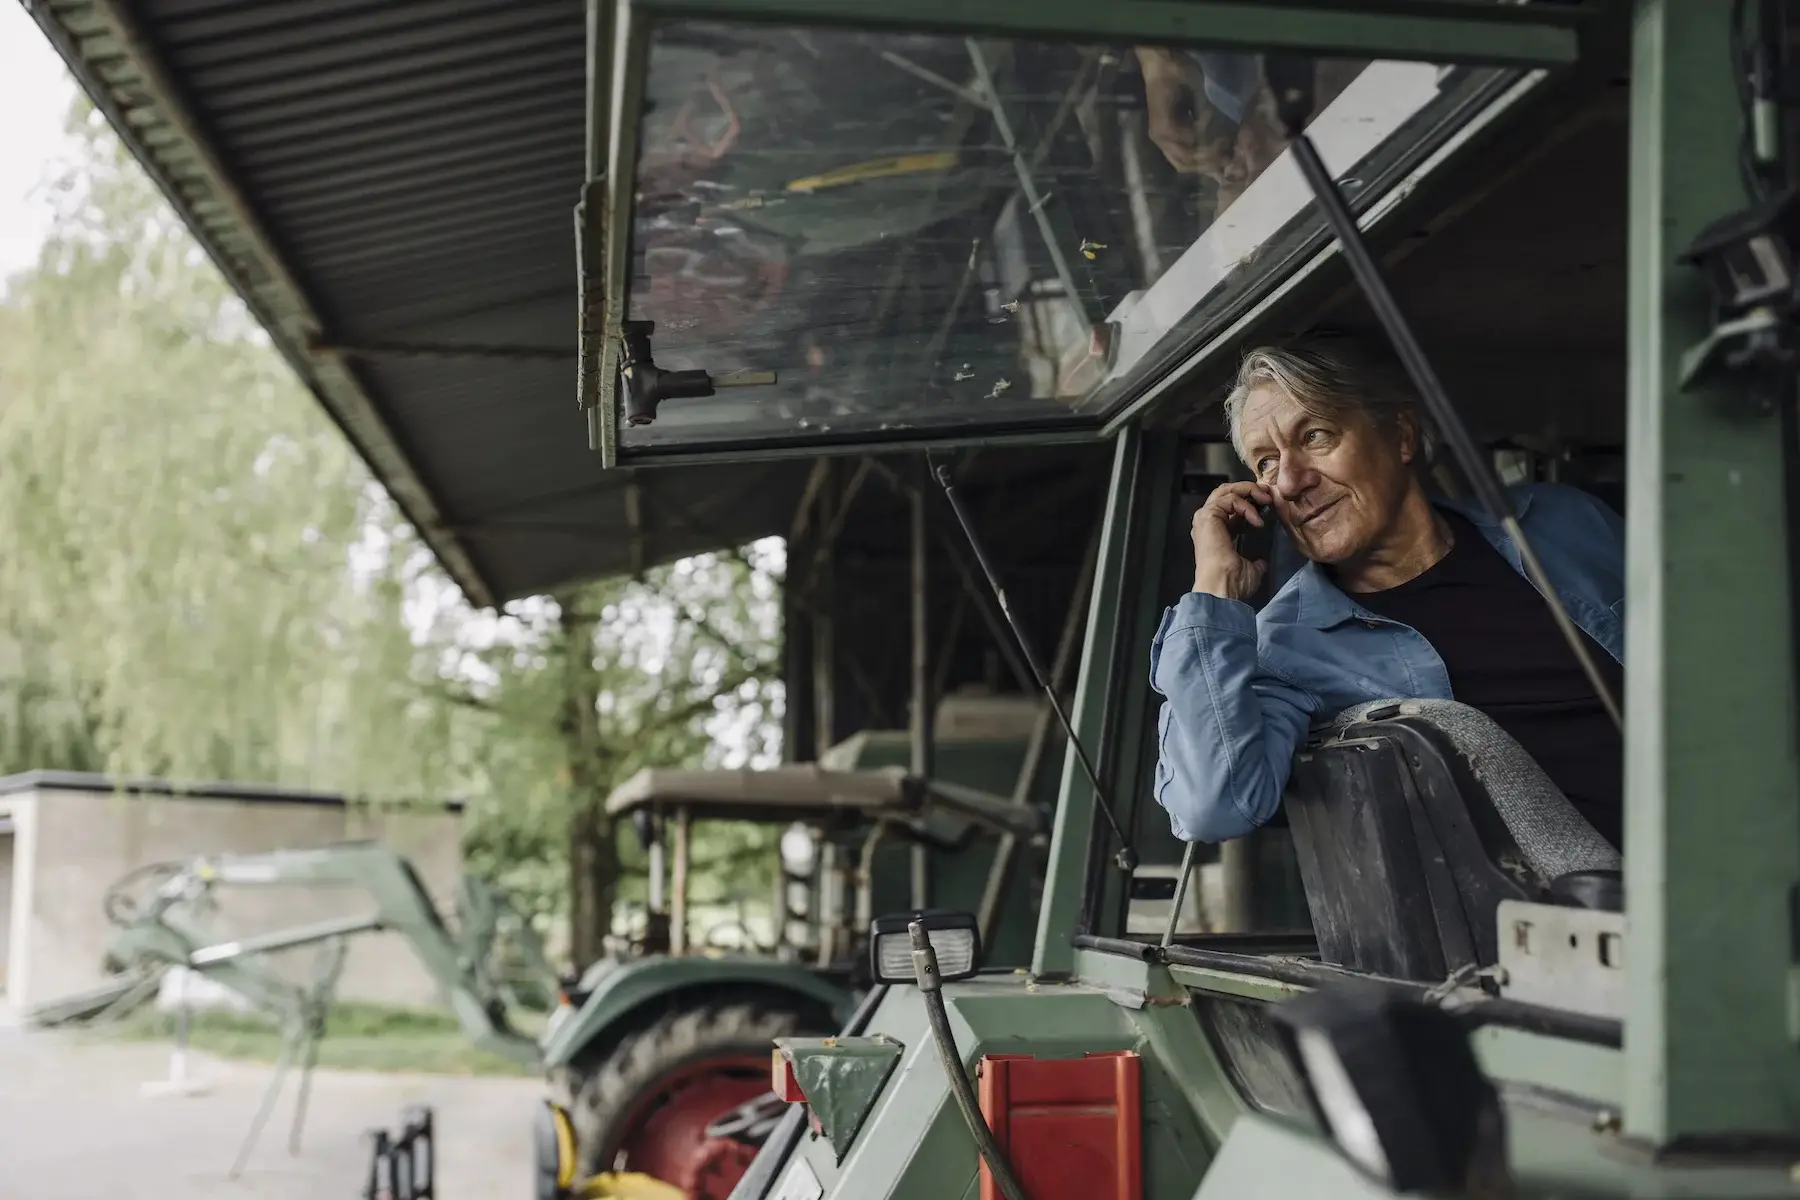 An farmer makes a phone call out the back window of his tractor